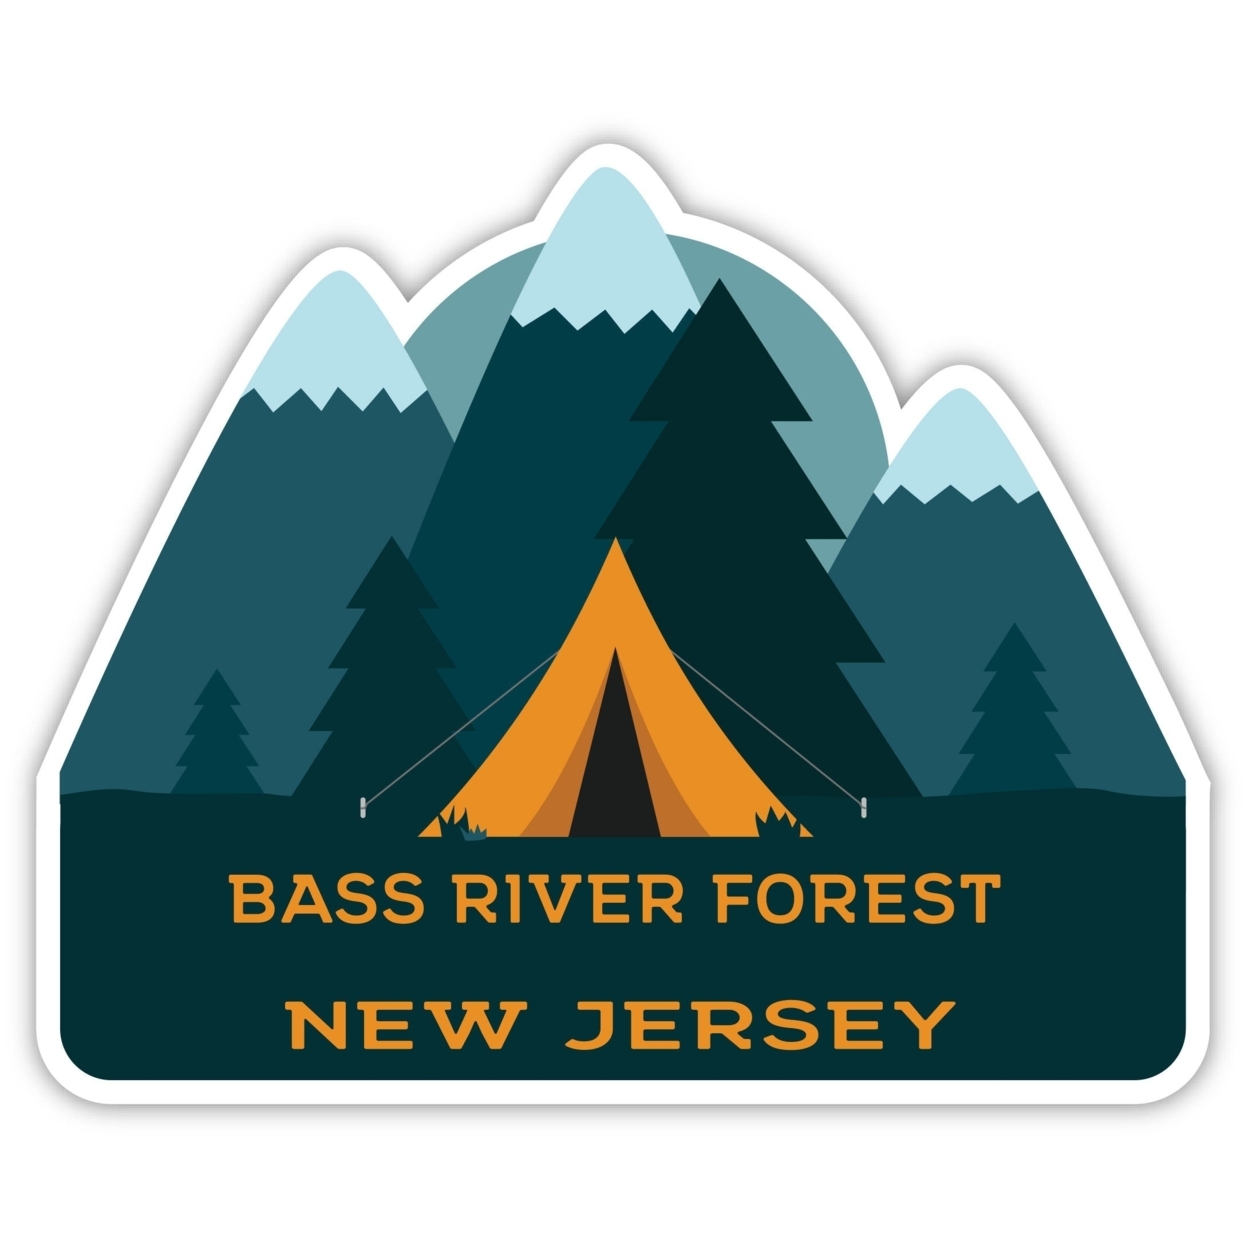 Bass River Forest New Jersey Souvenir Decorative Stickers (Choose Theme And Size) - 4-Pack, 4-Inch, Tent